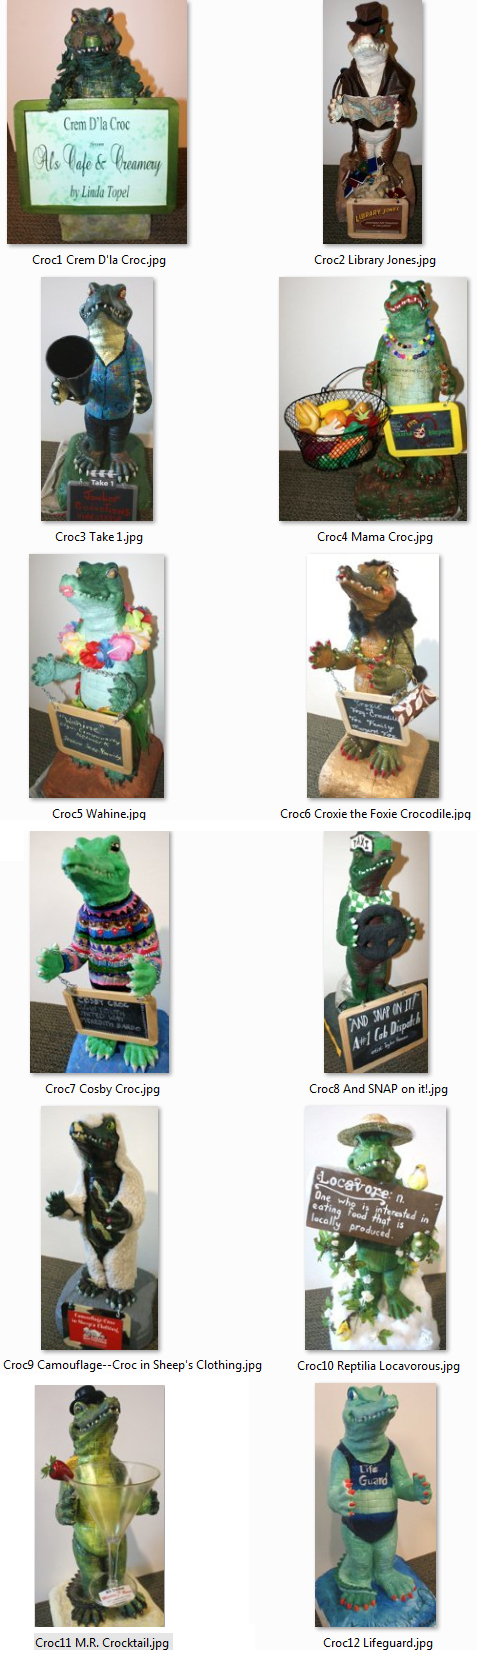 photographs of the crocs for voting